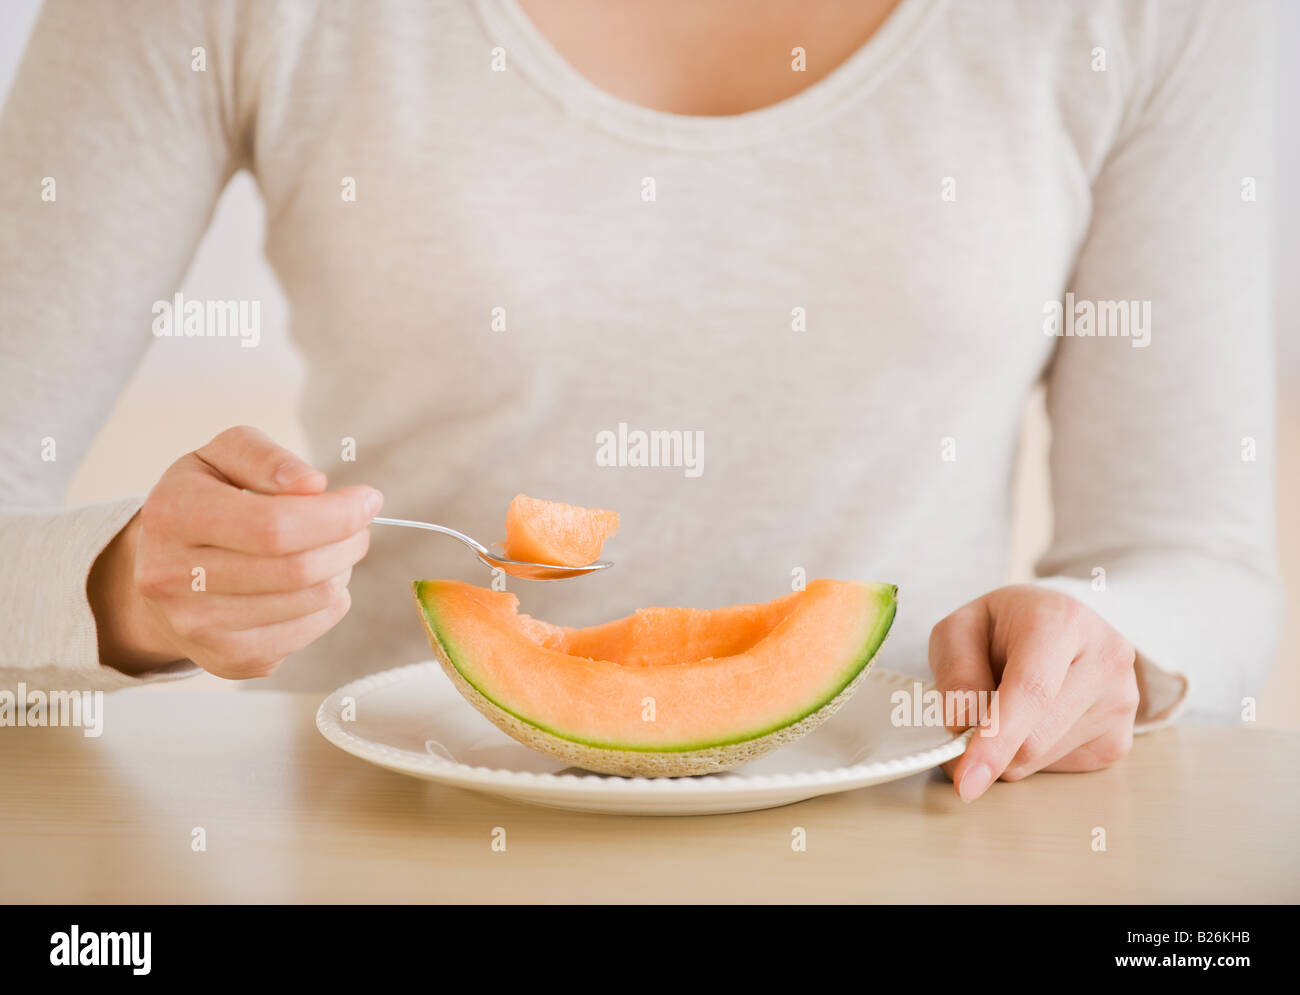 Woman eating melon wedge Stock Photo